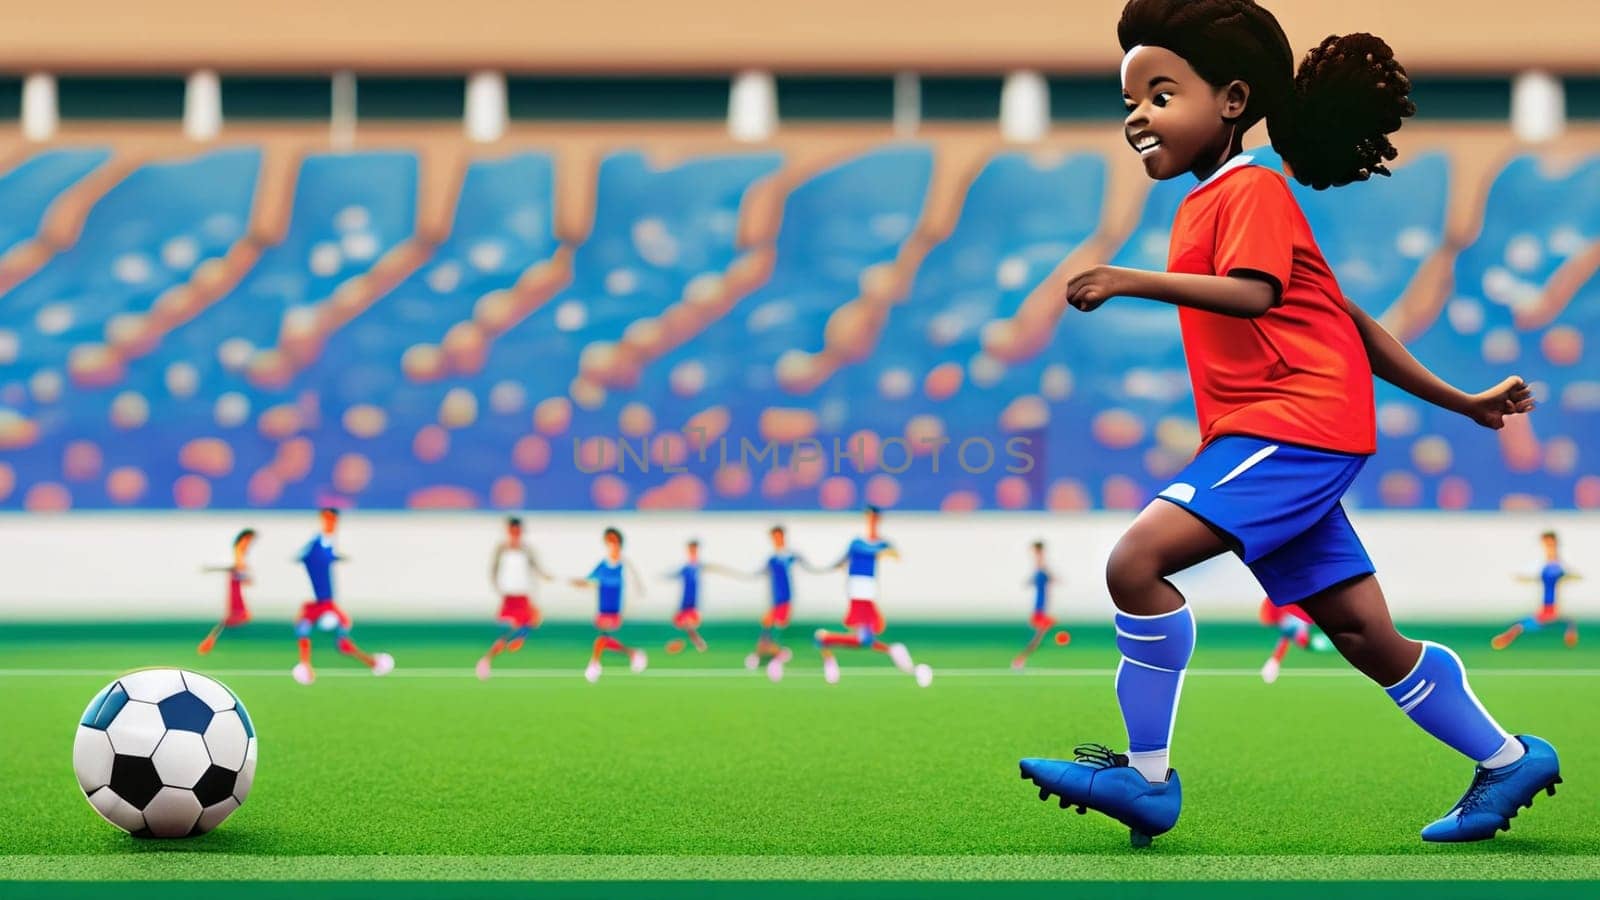 A young girl football player in colors of national spain football team plays with her feet a soccer ball. illustrations in cartoon style on sport stadium background for children by Costin